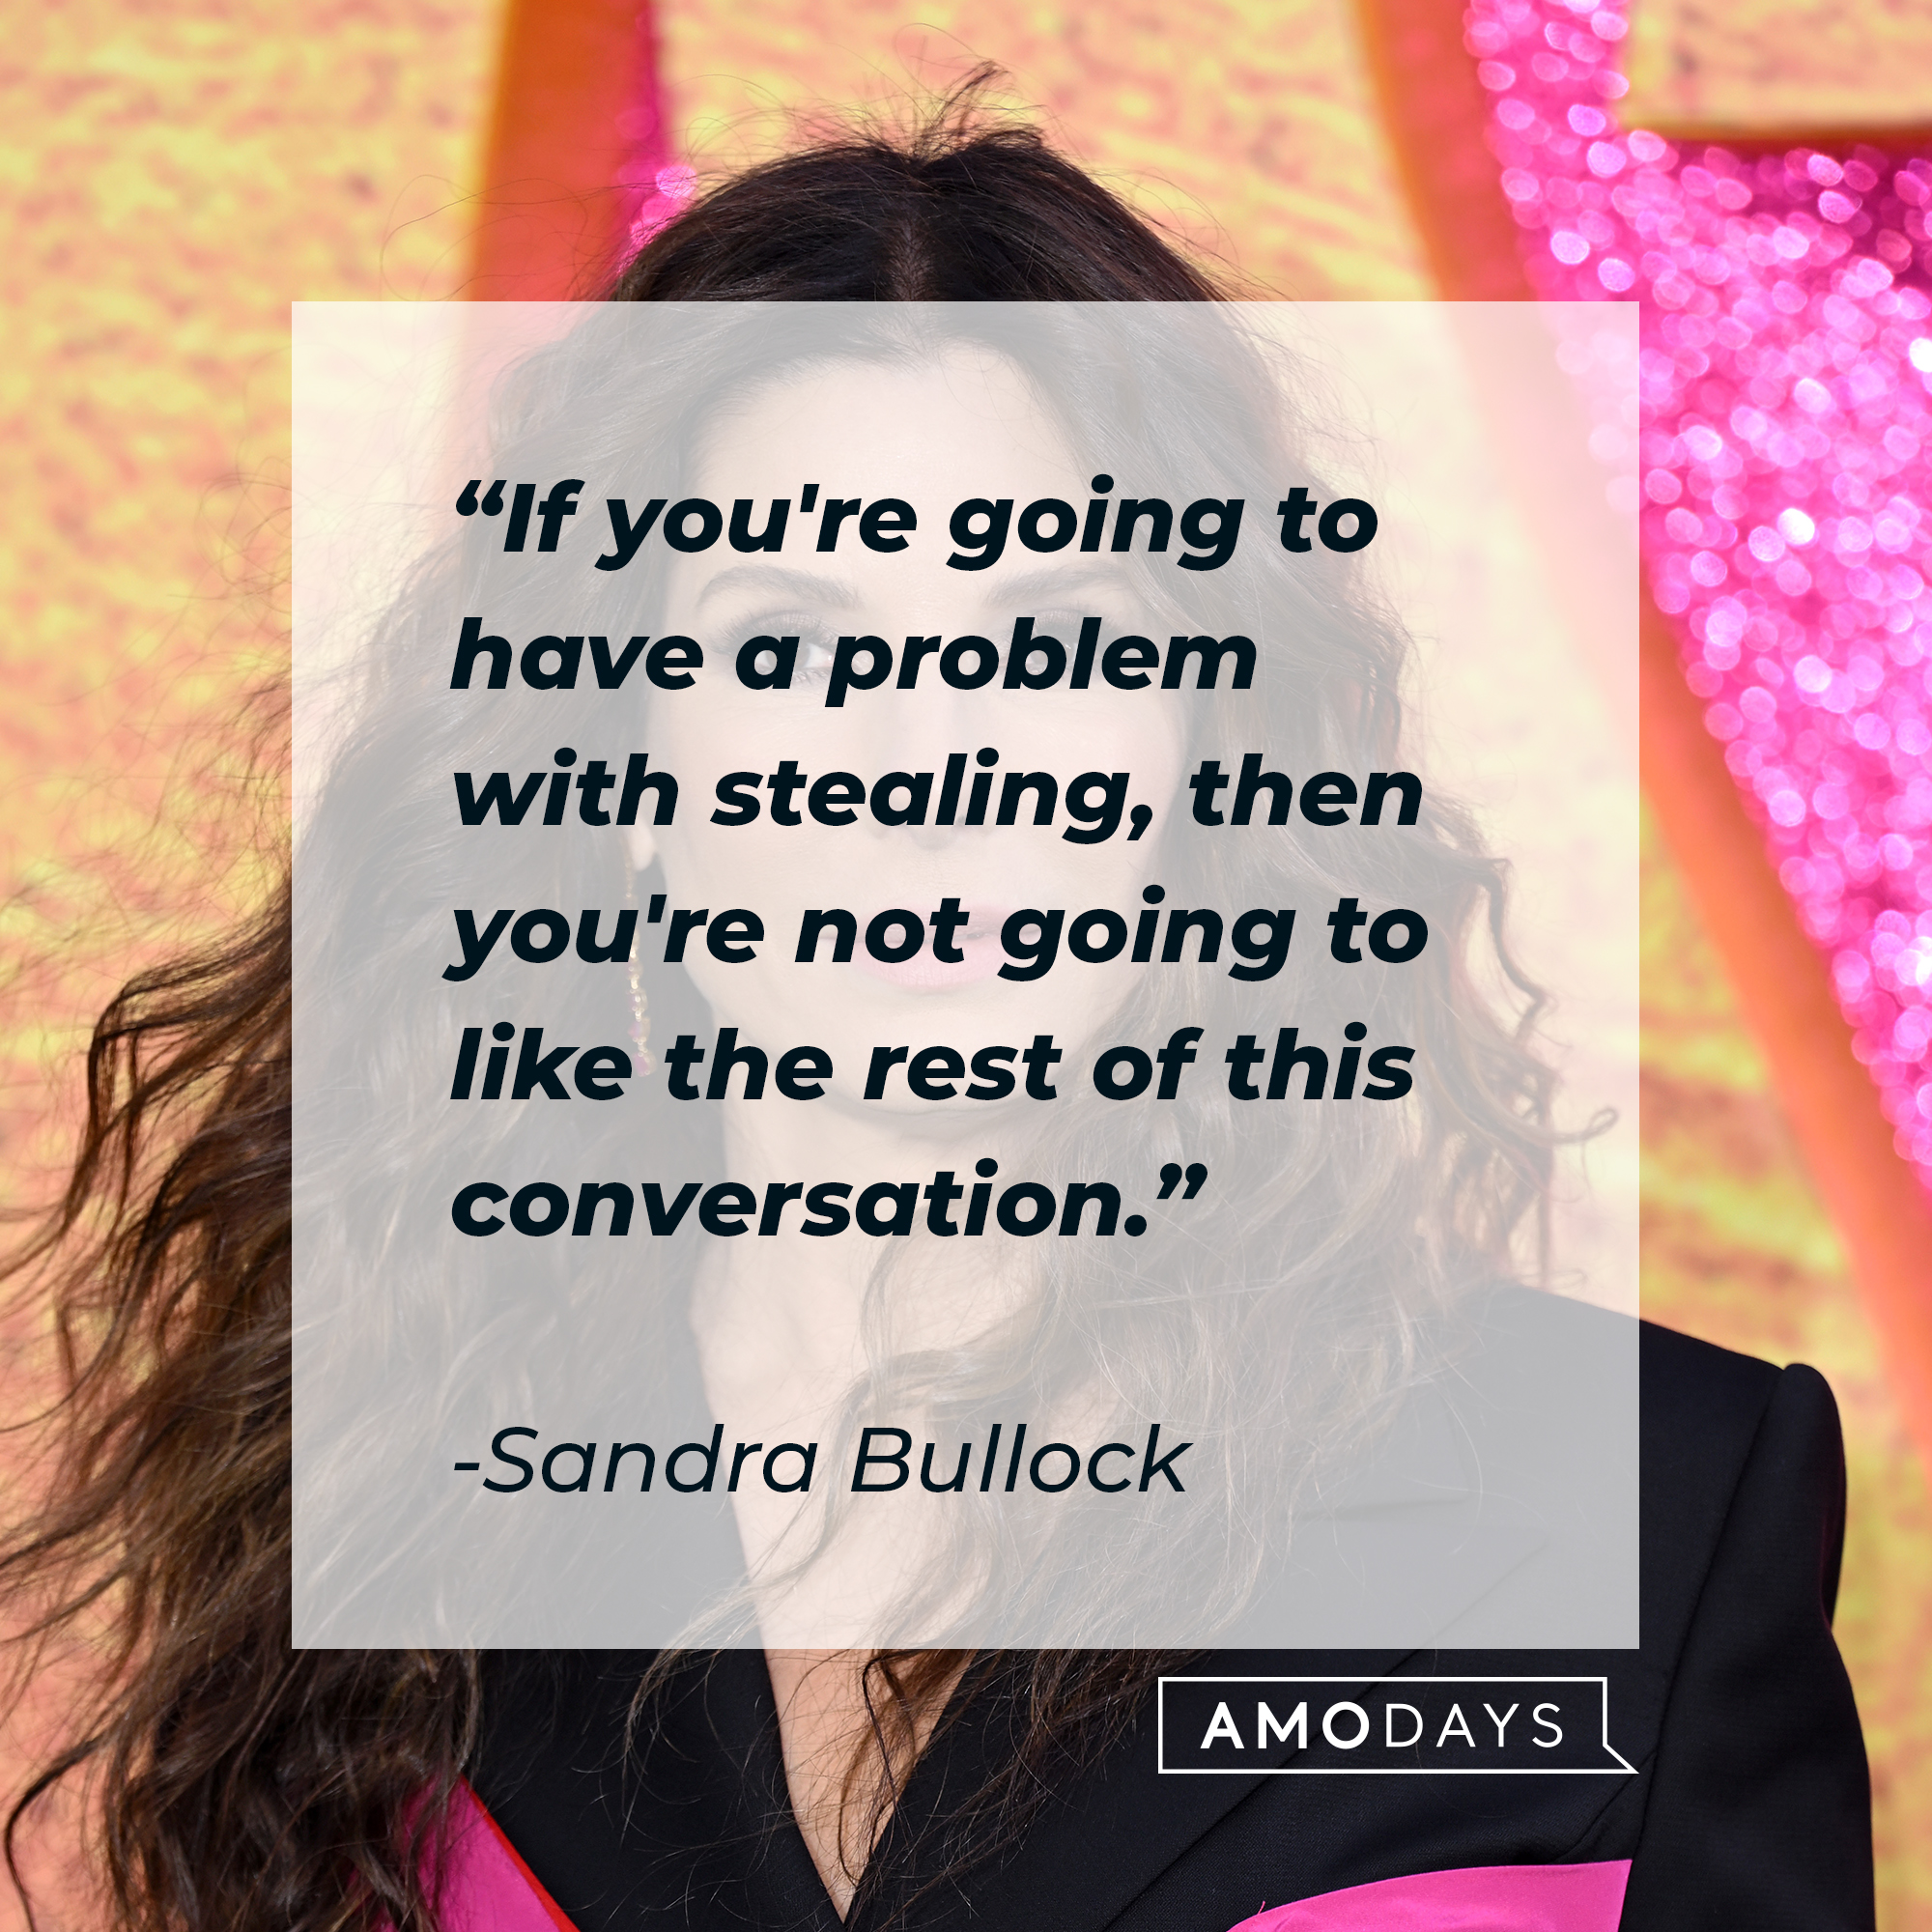 Sandra Bullock's quote: "If you're going to have a problem with stealing, then you're not going to like the rest of this conversation.” | Source: Getty Images